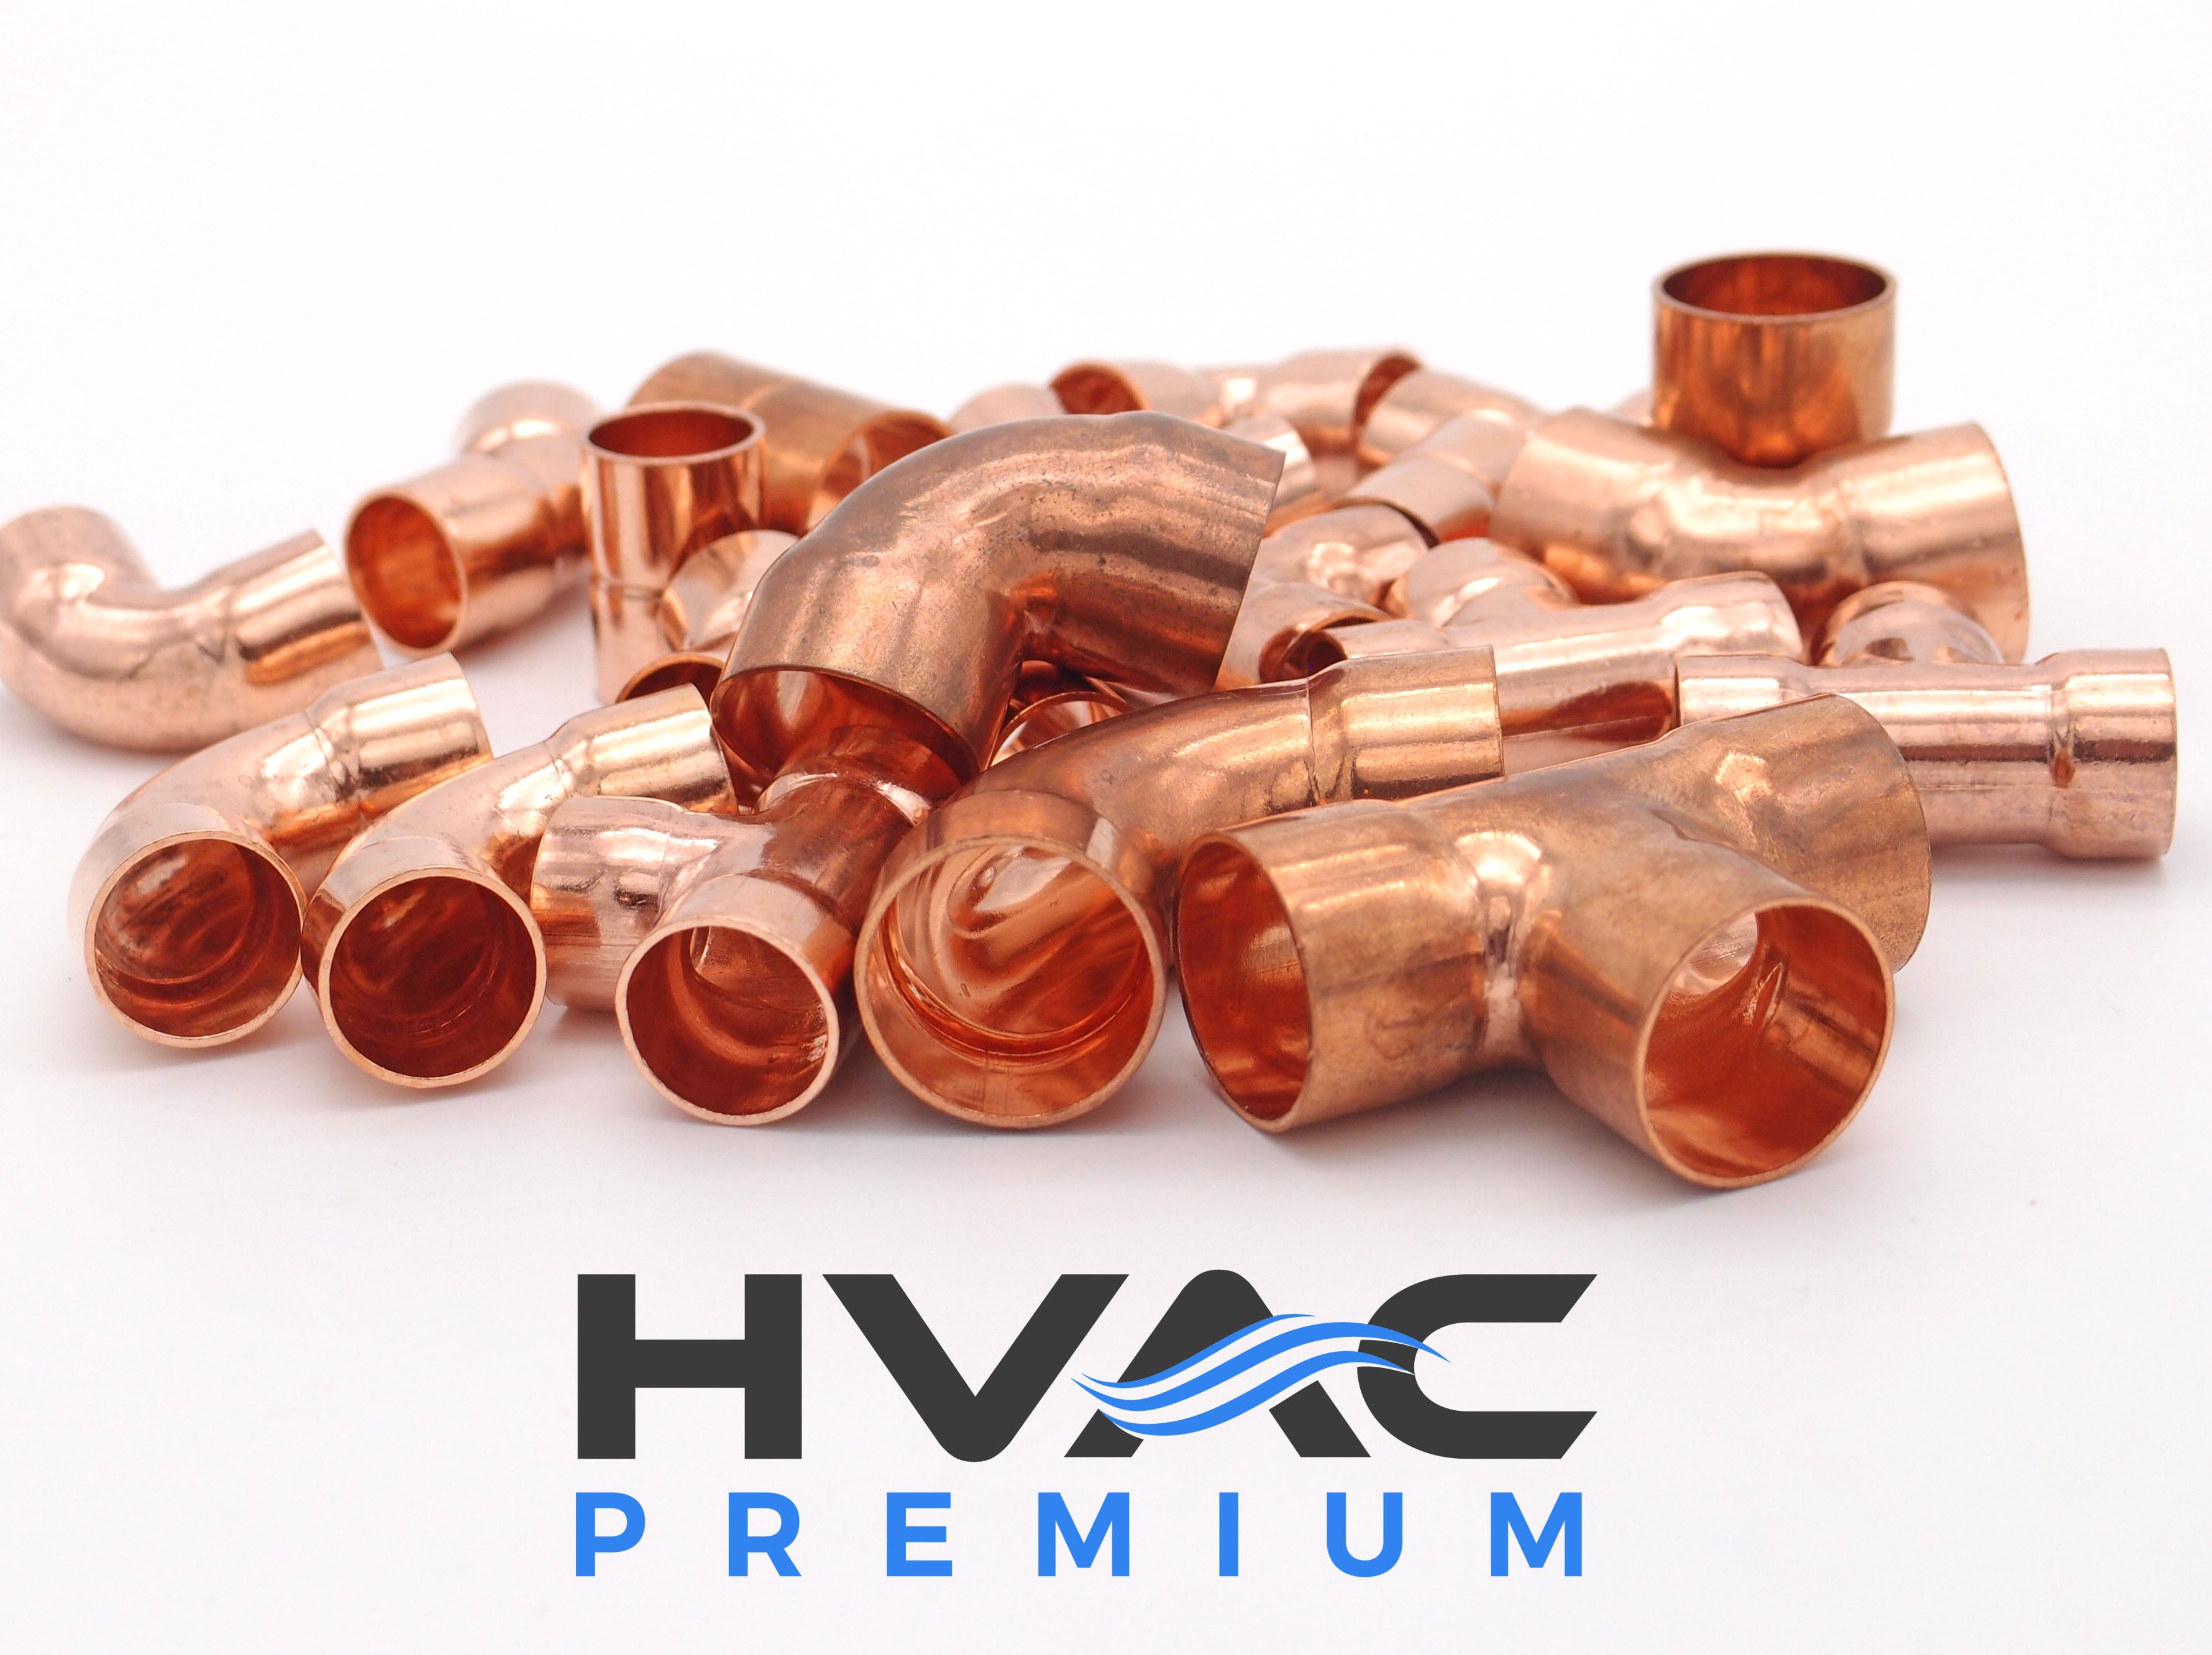 Copper Fitting 1-1/8 Inch (HVAC Outer Dimension) 1 Inch (Plumbing Inner Dimension) - Copper 90 Degree Elbow Fitting Connector - 99.9% Pure Copper - 10 Pack